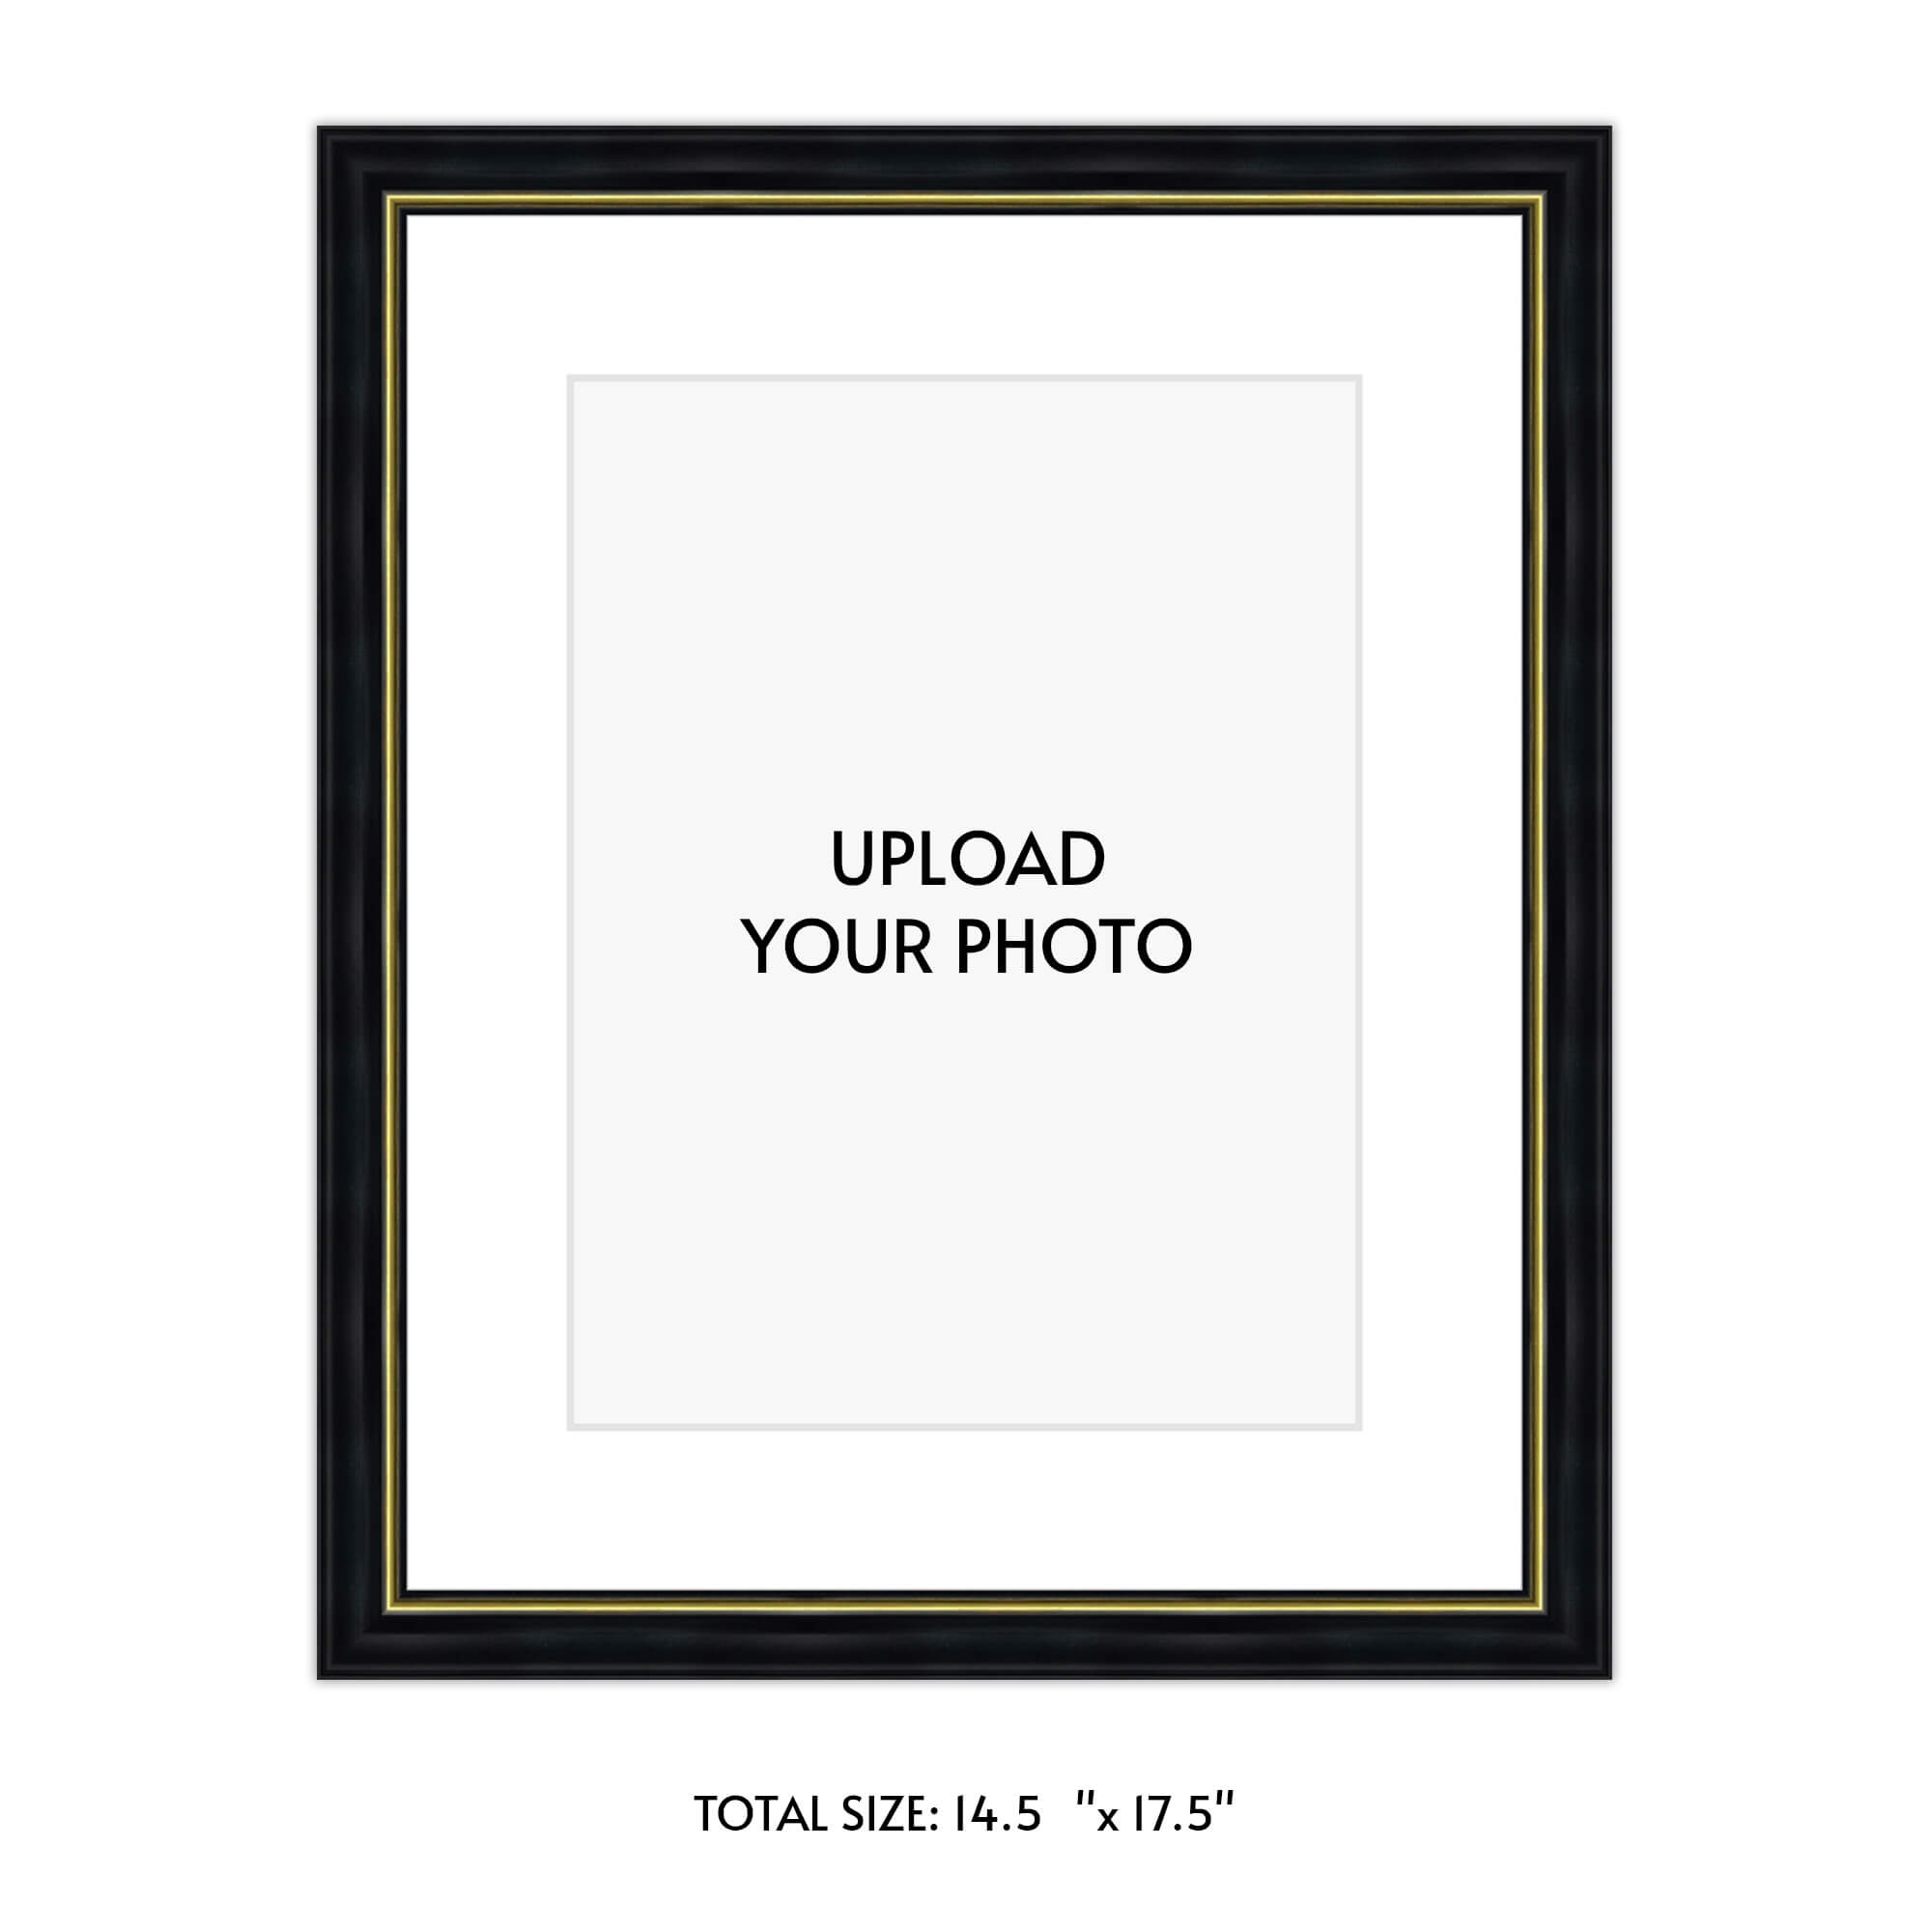 9x12 Picture Size with Assorted Frame Options